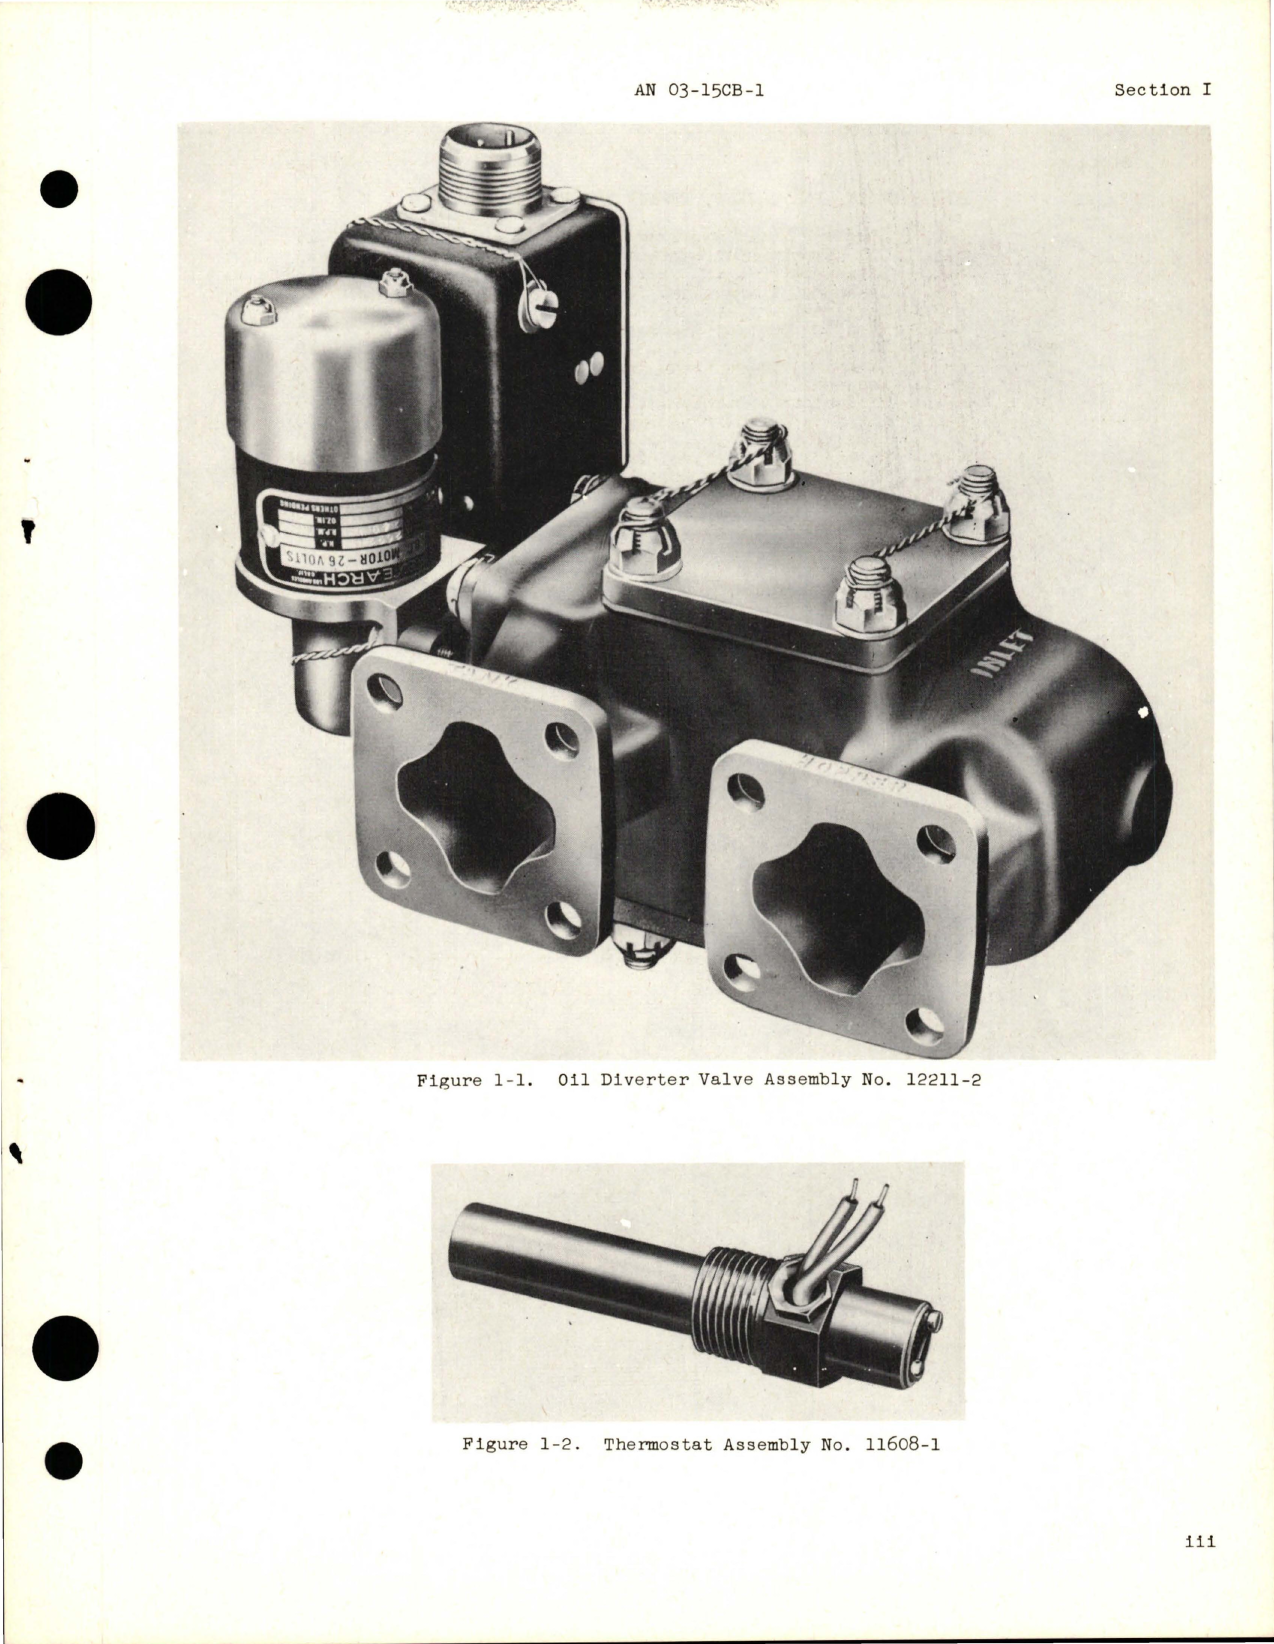 Sample page 5 from AirCorps Library document: Operation, Service and Overhaul Instructions for Oil Diverter Valve Assembly, Floating Control Thermostat Assembly and Thermostat Assembly